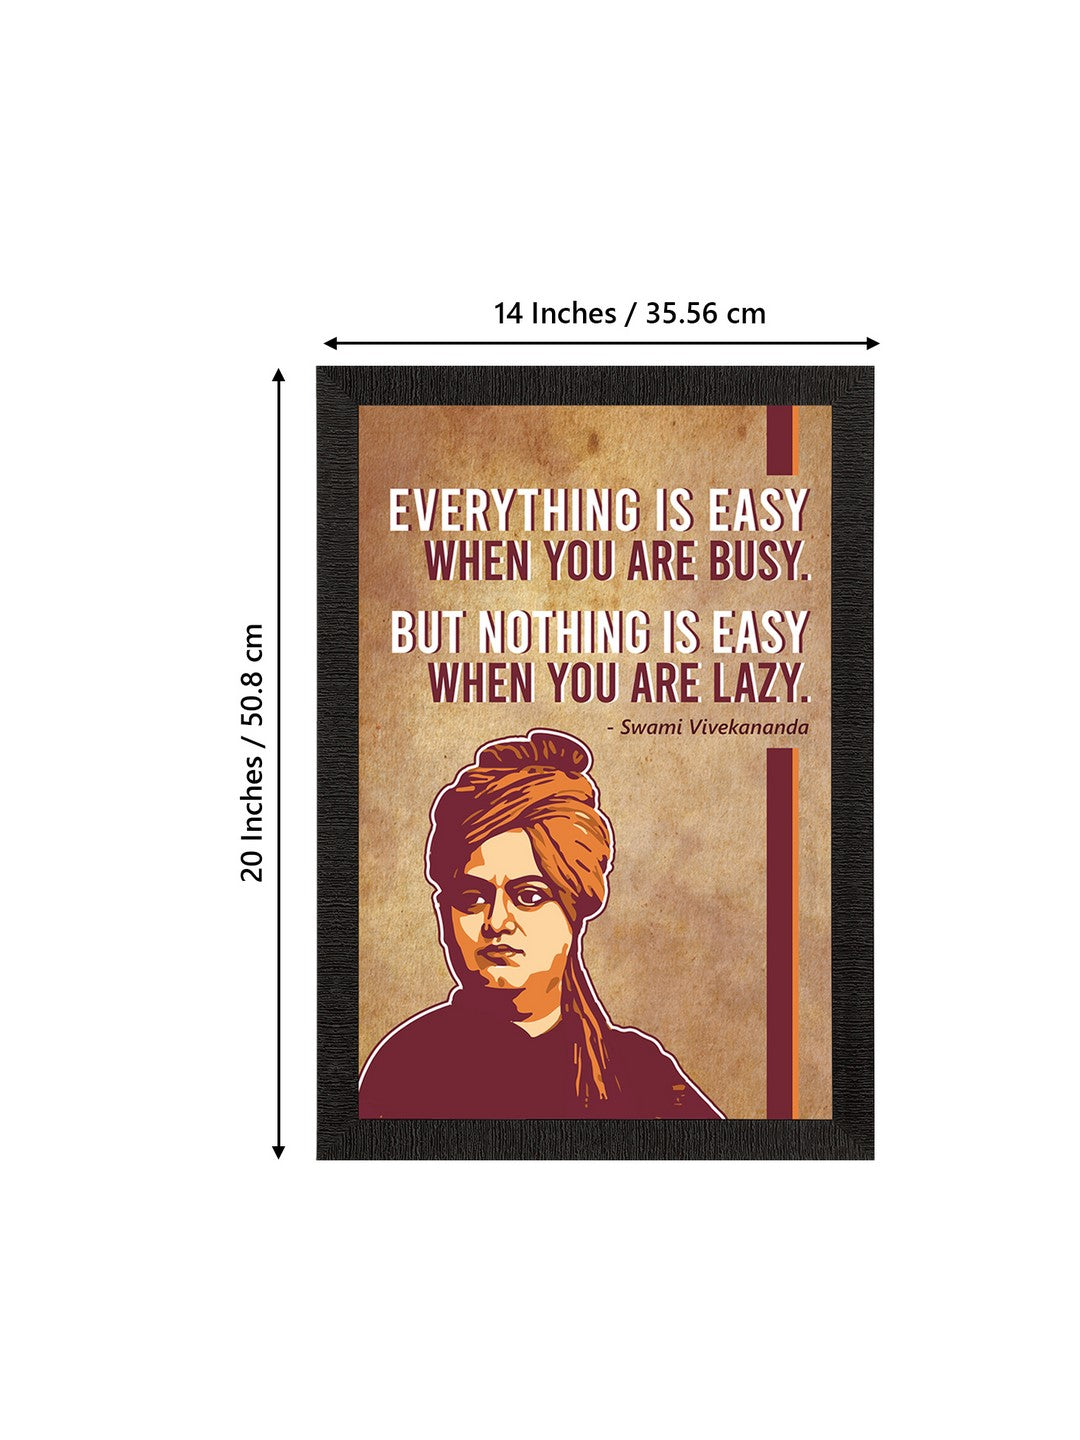 Everything Is Easy When You Are Busy, But Nothing Is Easy When You Are Lazy Swami Vivekananda Motivational Quote Painting 3